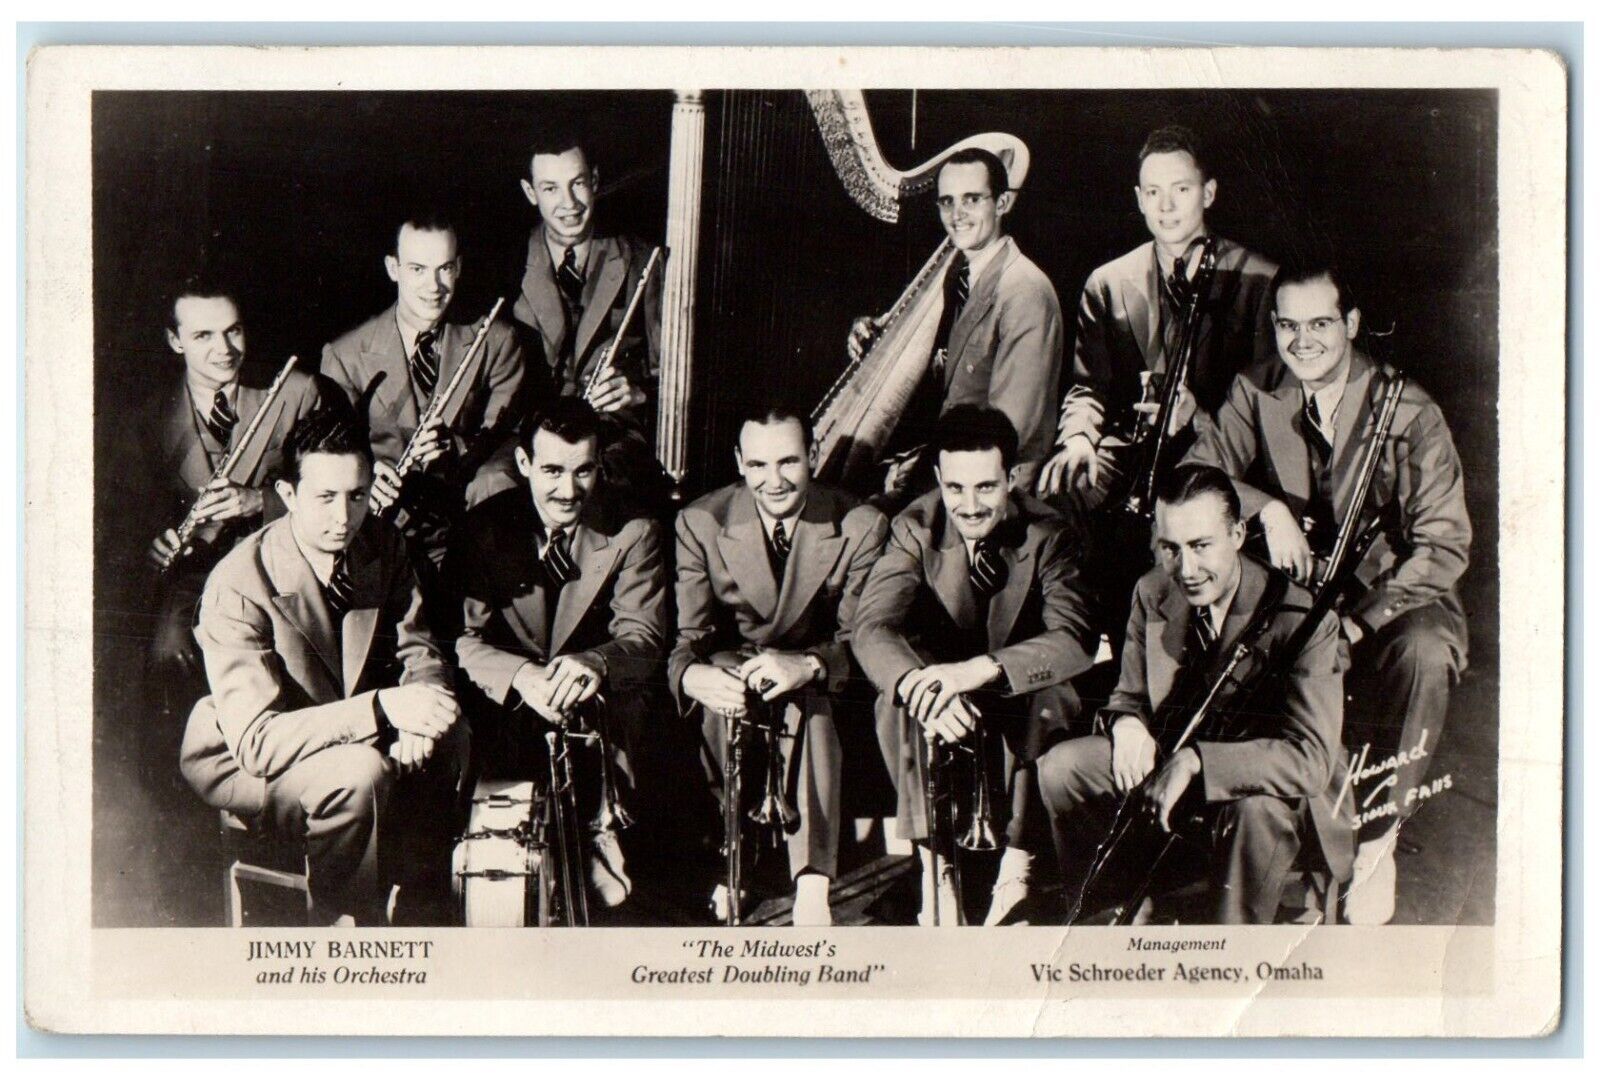 c1940's The Midwest Greatest Doubling Band Orchestra RPPC Photo Vintage Postcard